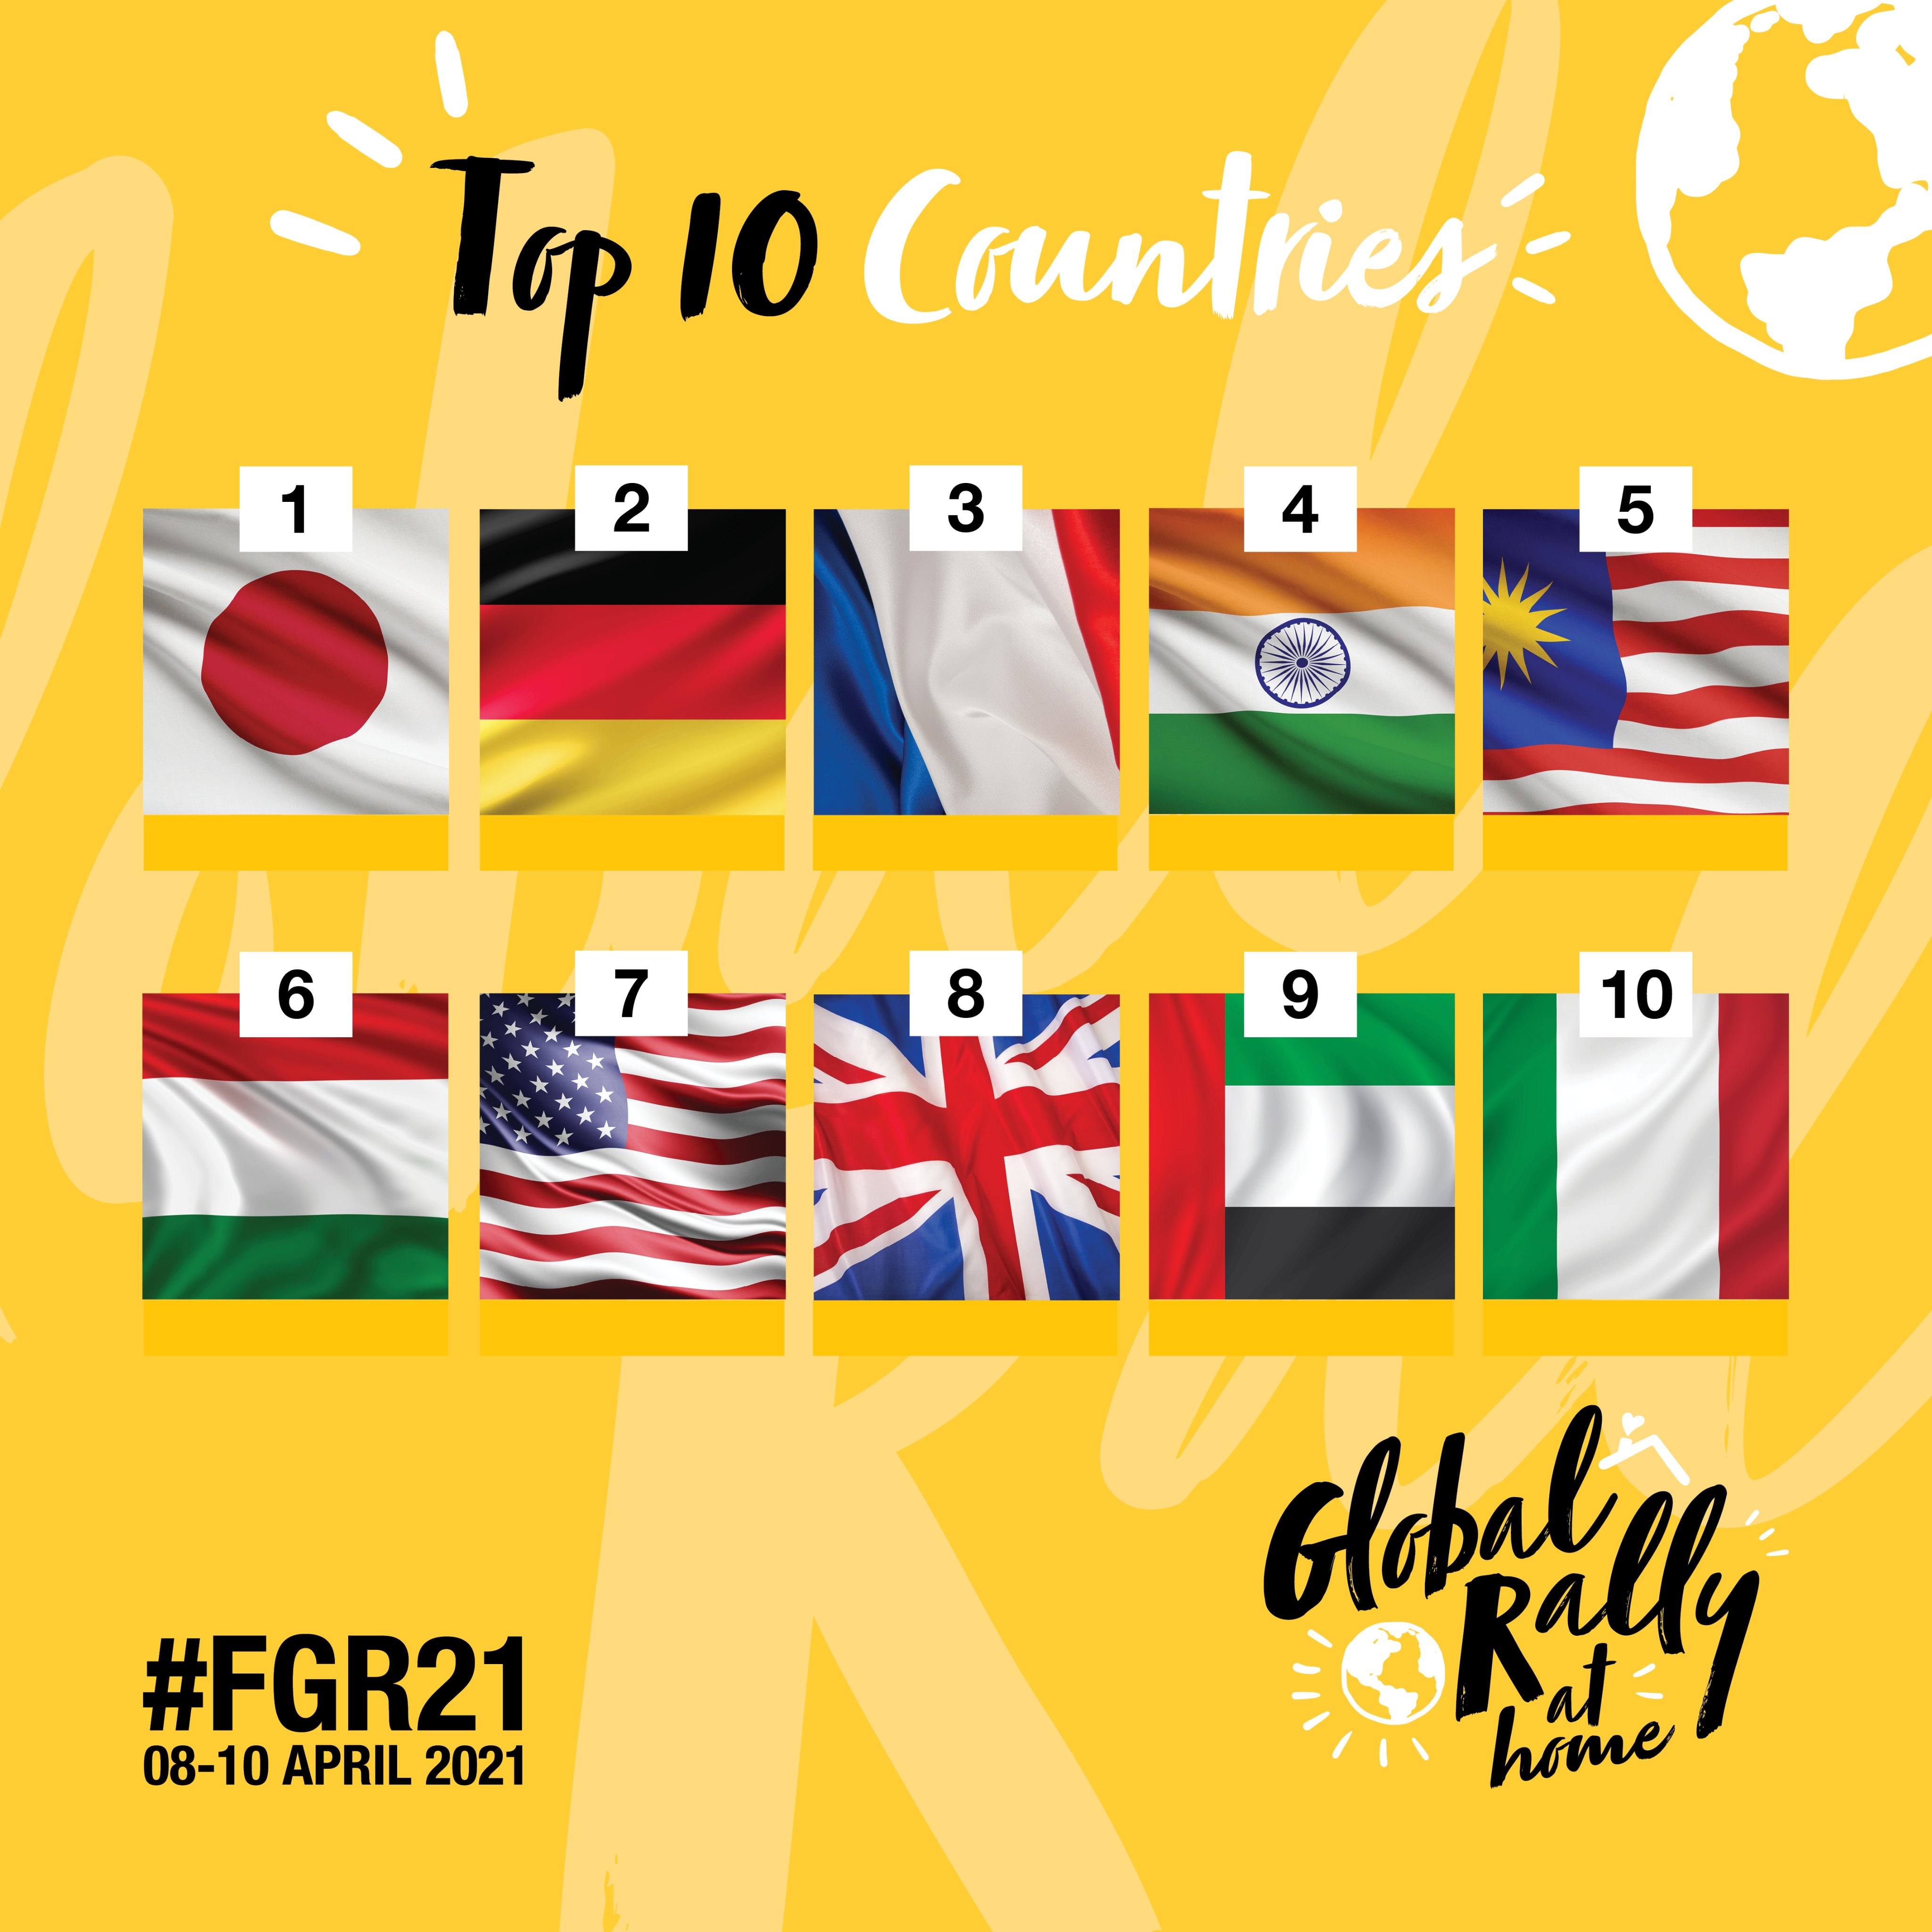 Forever Products UK & Ireland on Twitter: "Here are the top 10 countries for 2021 Congratulations to all of the countries and Forever Business Owners who made it into the top